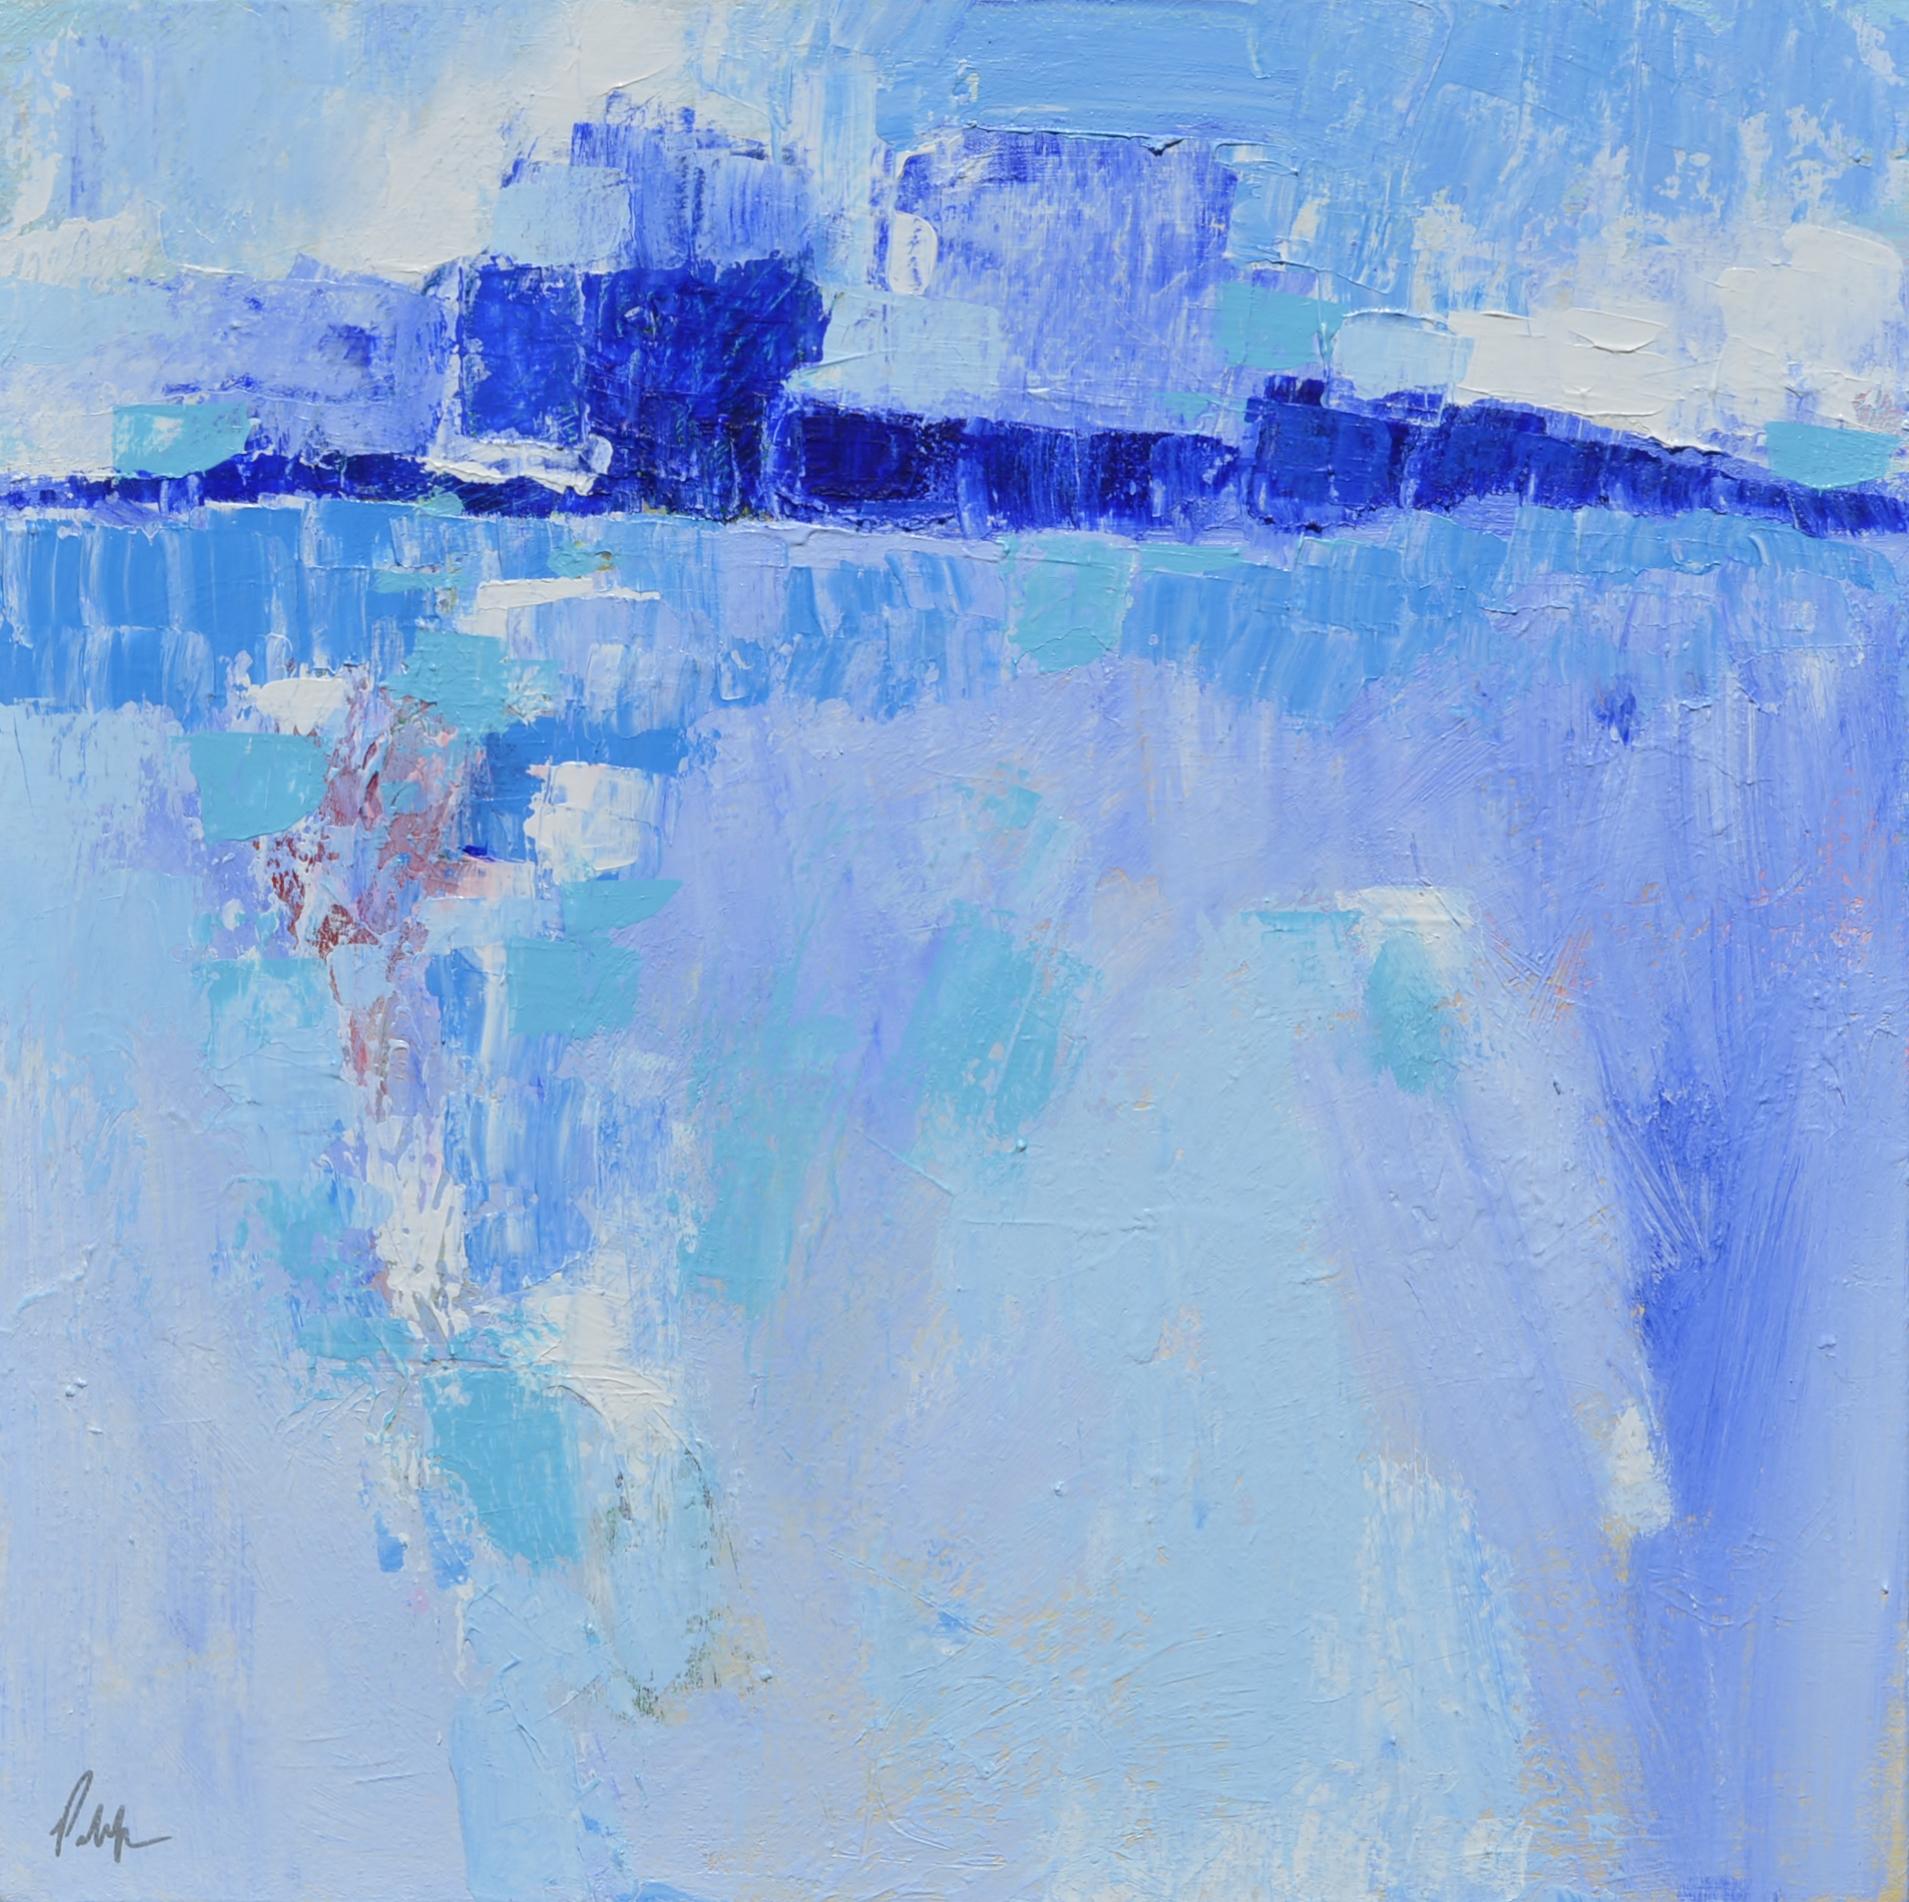 Abstract Painting Patrick O'Boyle - Abstraction du paysage